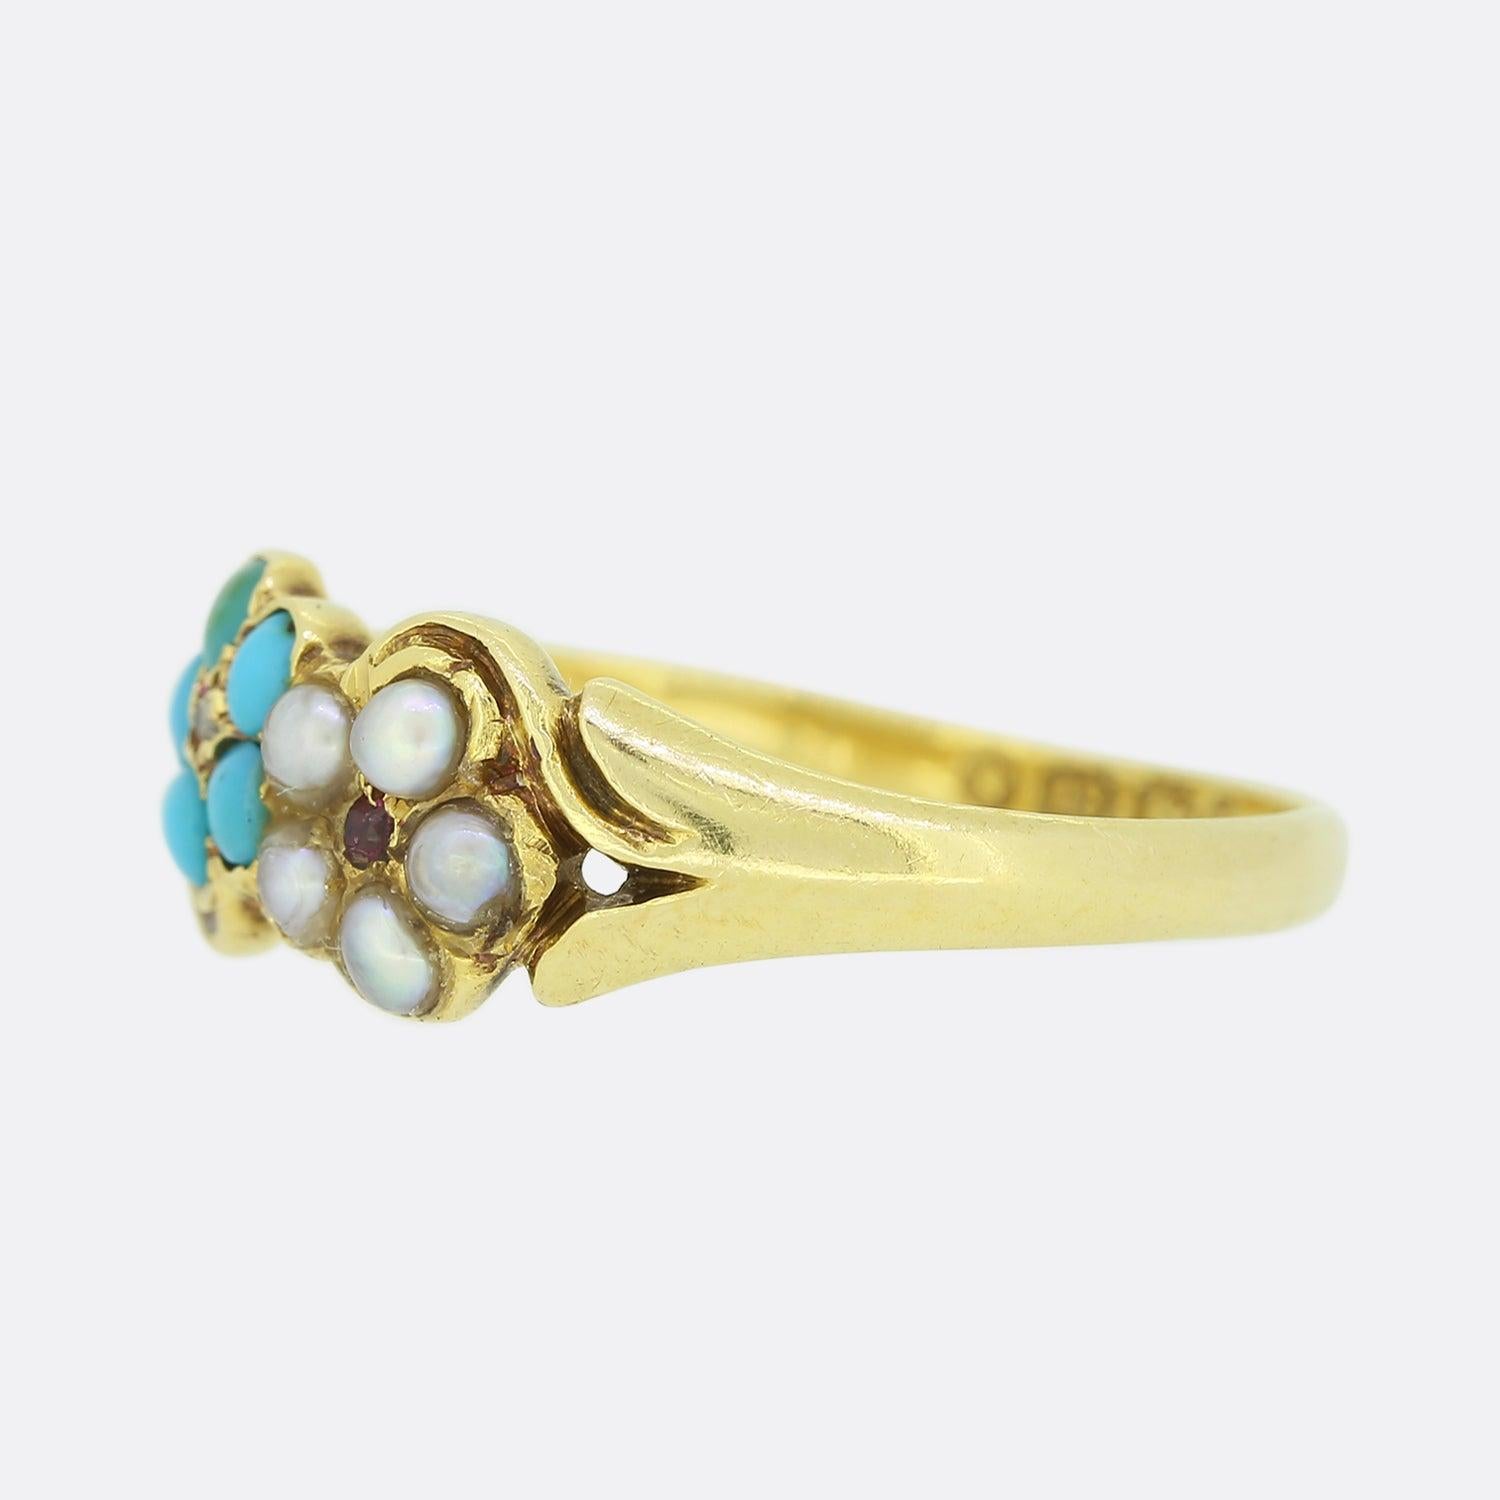 This is an 18ct yellow gold turquoise and pearl cluster ring from the Victorian era. Sat between a pair of swirling open shoulders are a cluster of round natural pearls with a centralised rose cut diamond and a cluster of turquoise with a